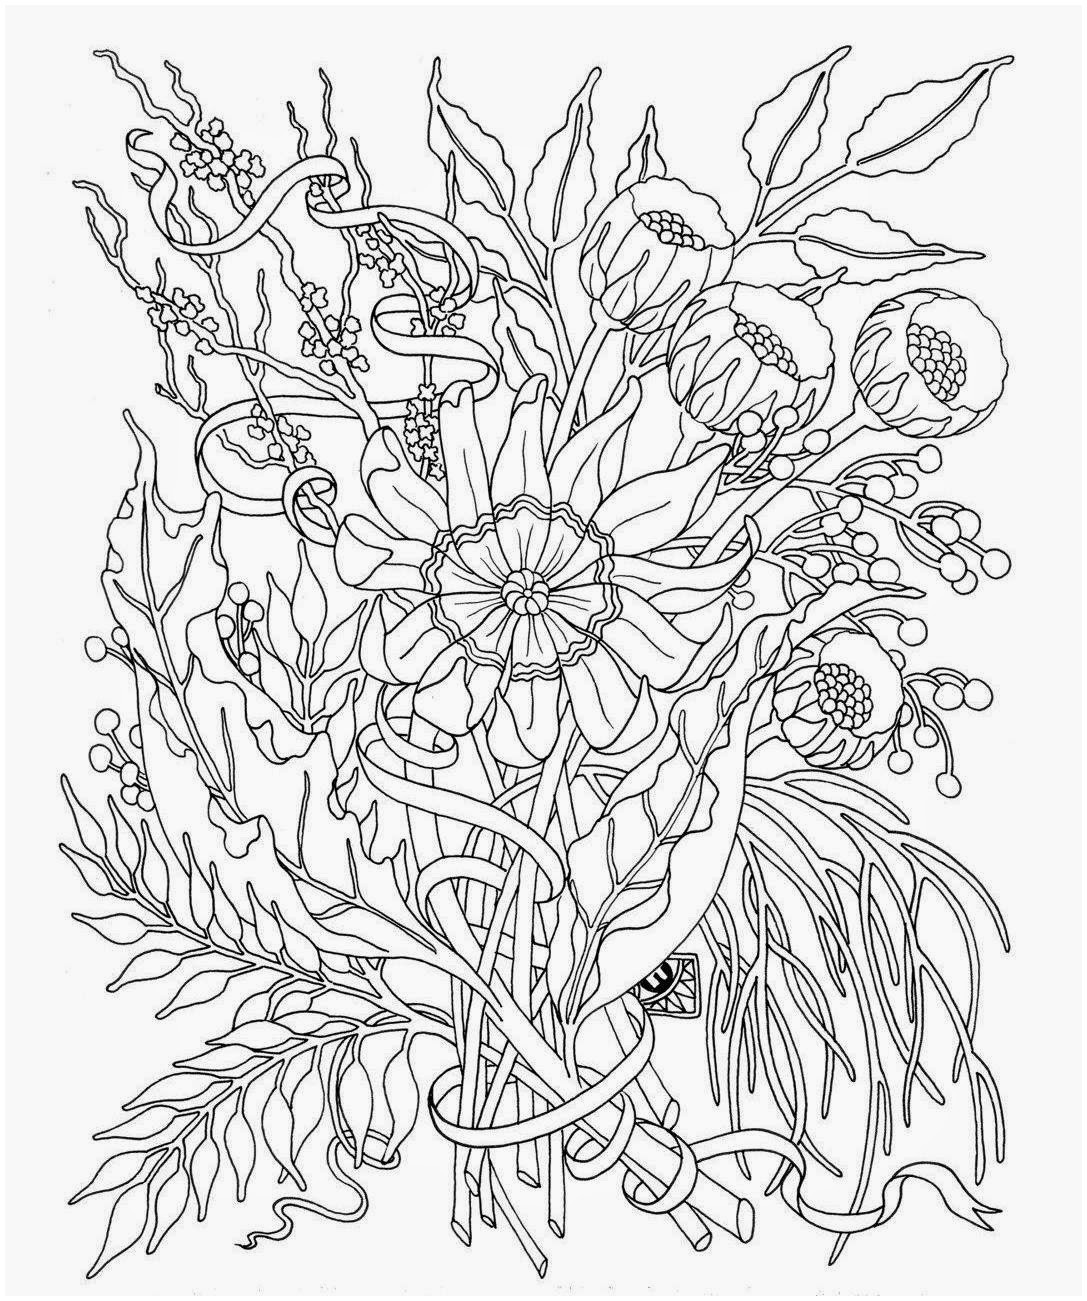 20 Amazing Mickey Mouse Flower Vase 2024 free download mickey mouse flower vase of coloring pages disney bestcoloringpages me within coloring pages disney best of vases flower vase coloring page pages flowers in a top i